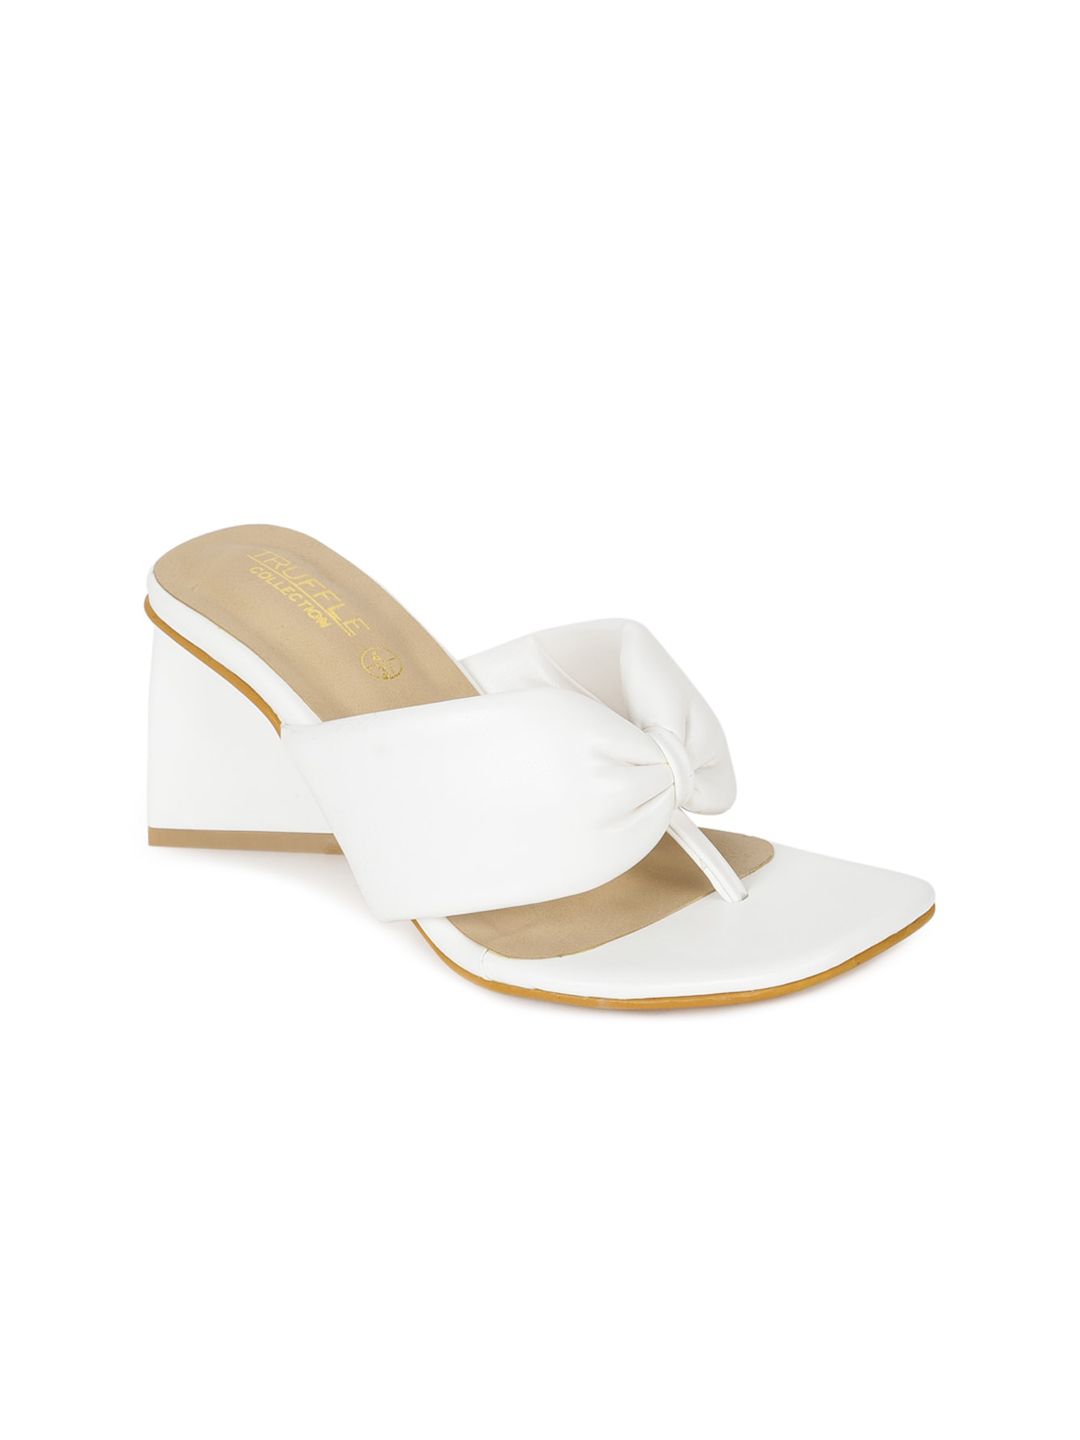 Truffle Collection White PU Block Heels Price in India